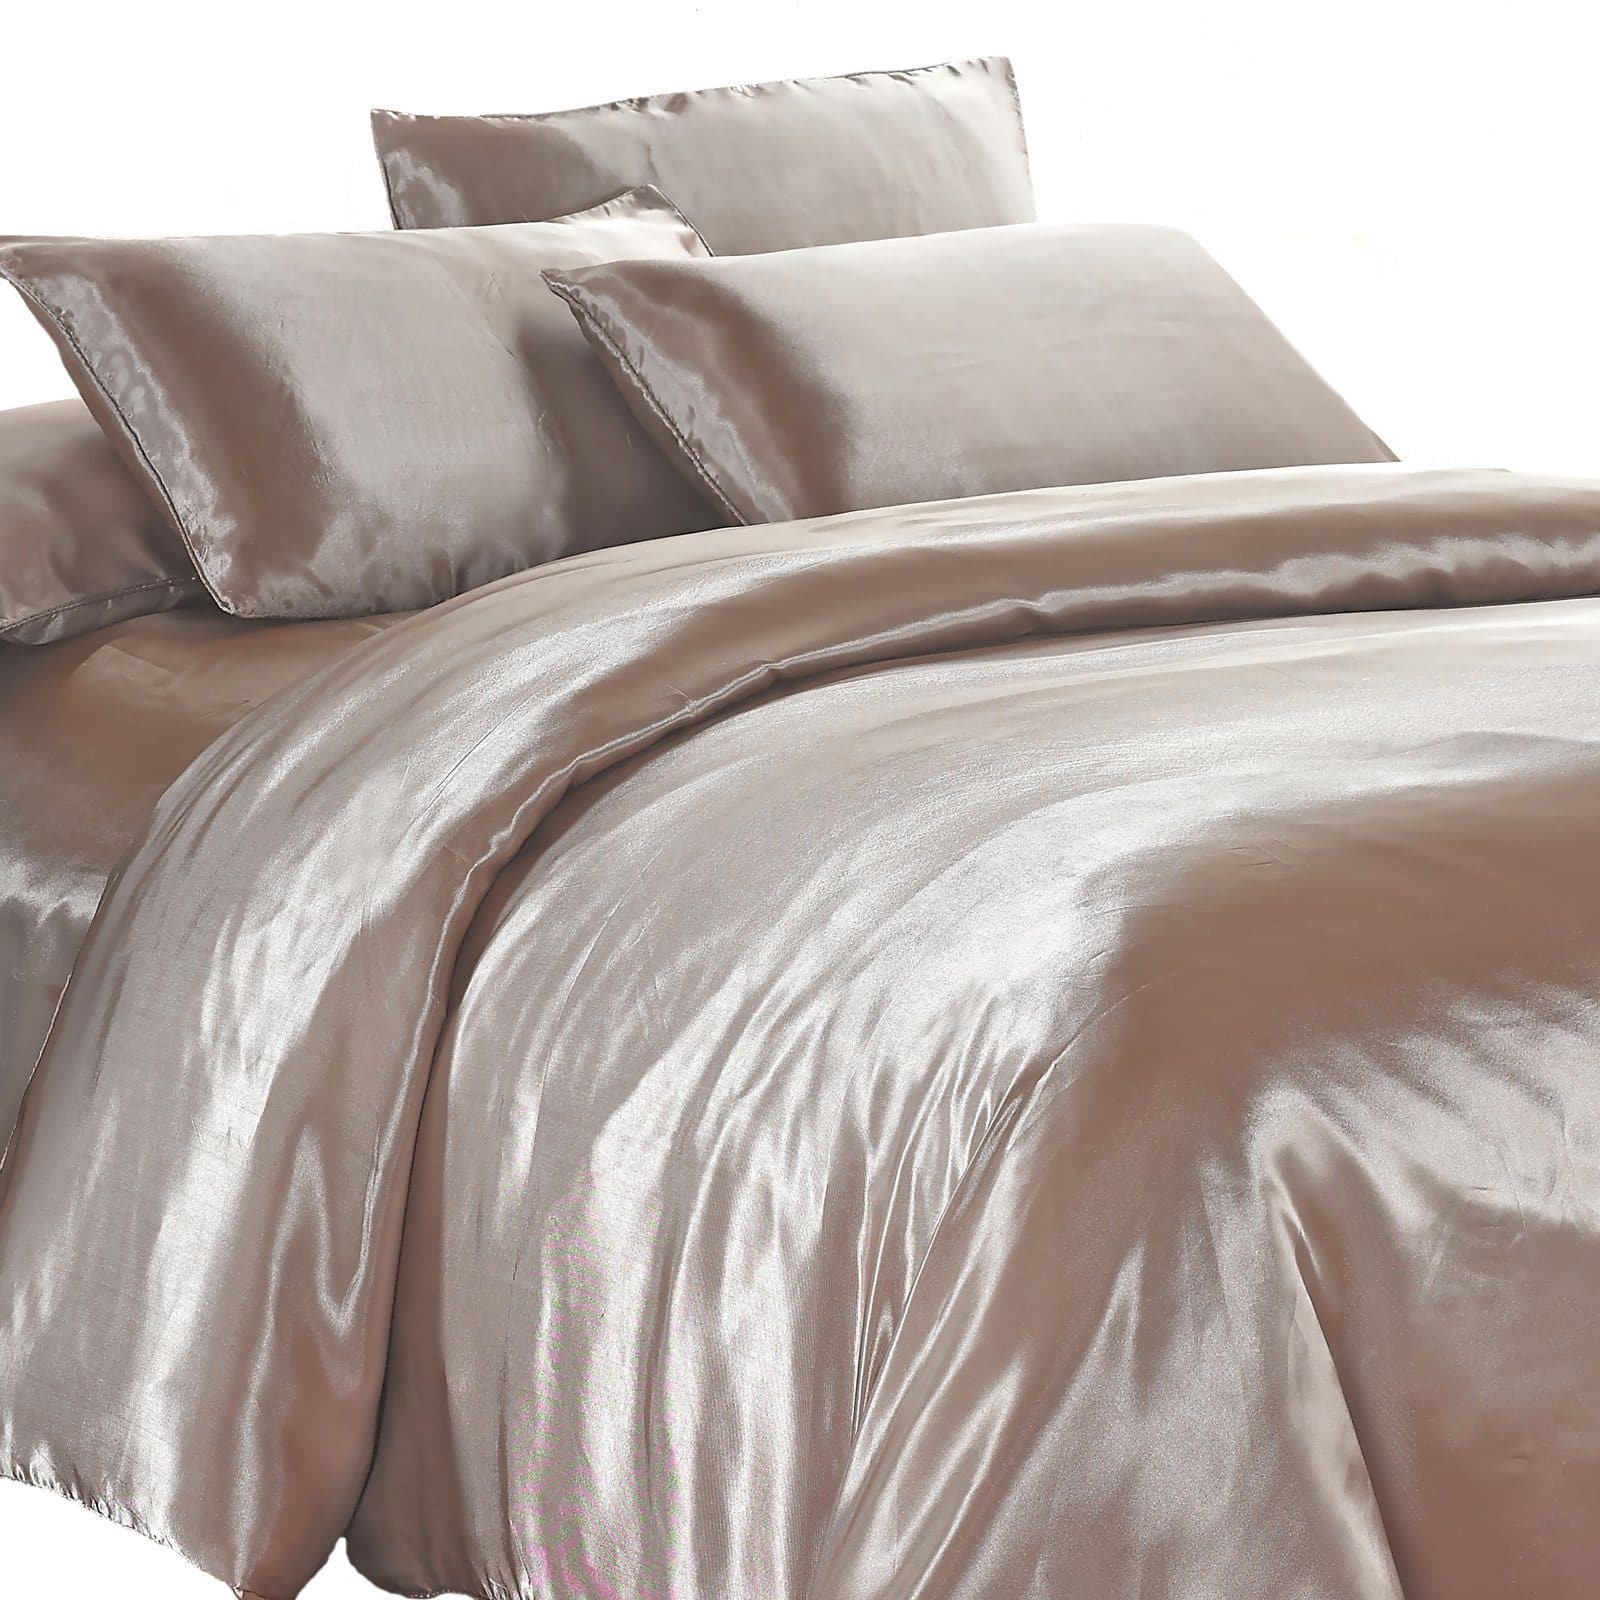 Satin Quilt Cover - Champagne Latte